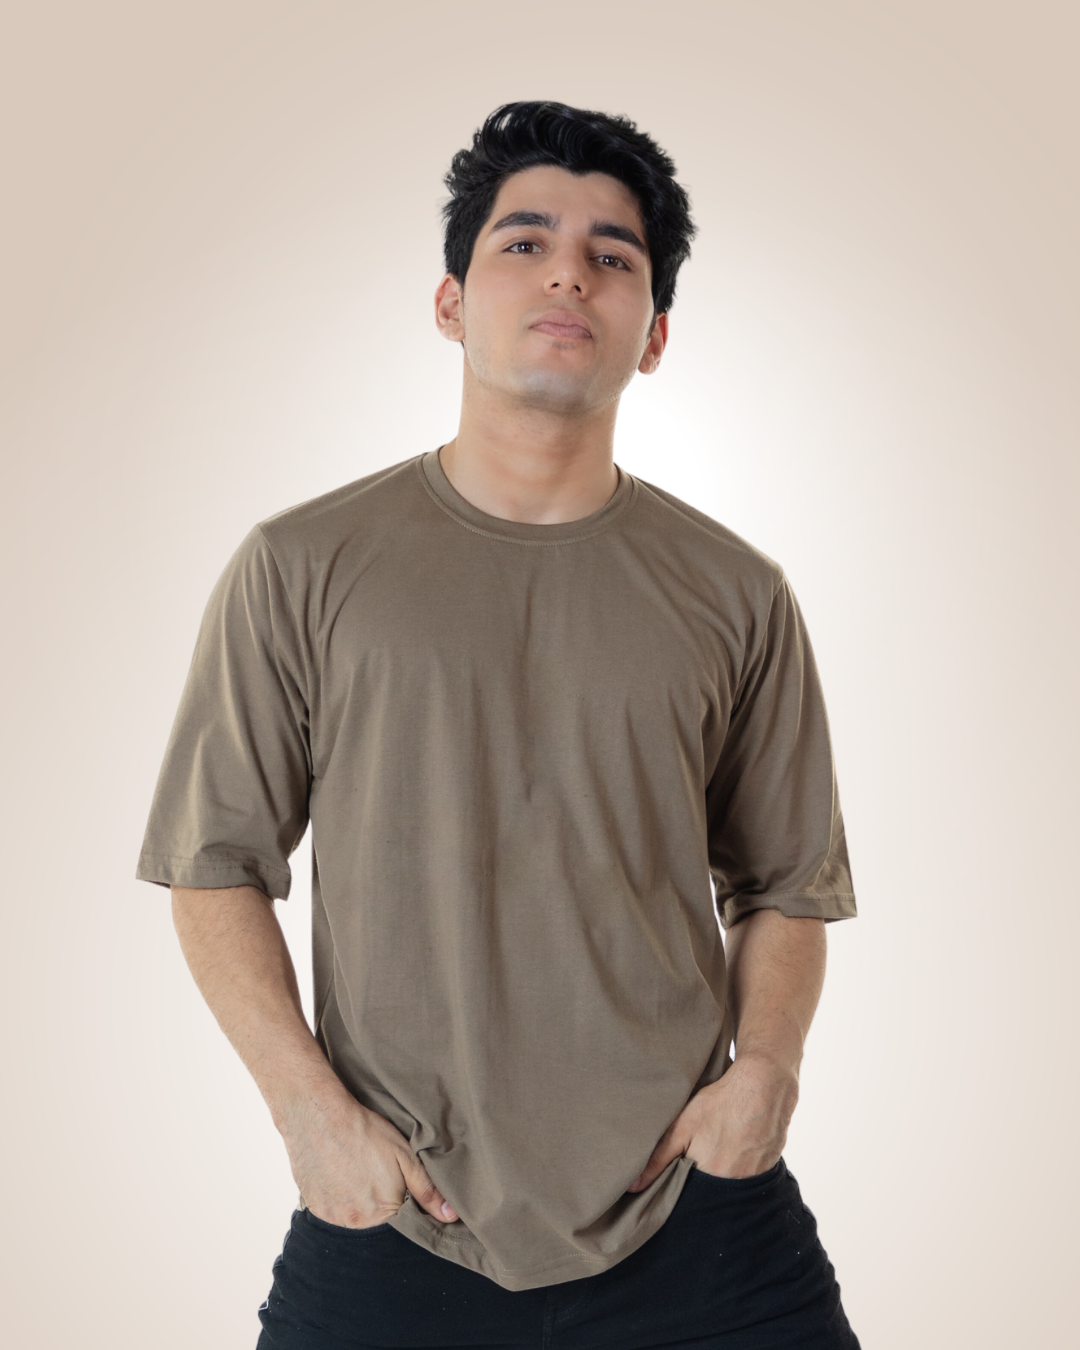 Oversized Peanut Solid T-shirt Crew Cut/Round Neck Elbow length Sleeves